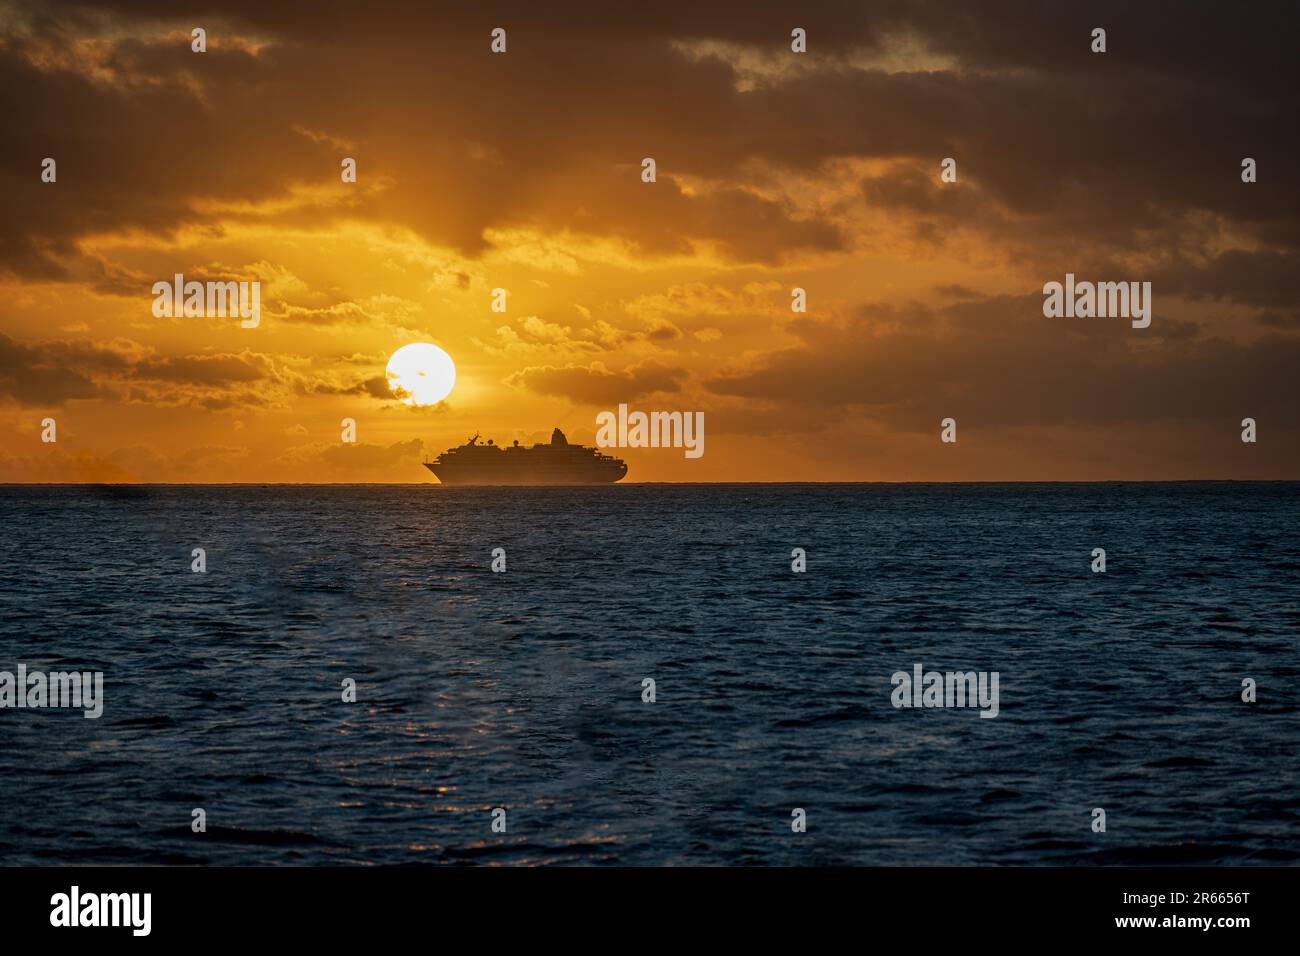 A dramatic shot of a distant ship seen from the deck of a catamaran on a sunset cruise from Bora Bora. Stock Photo